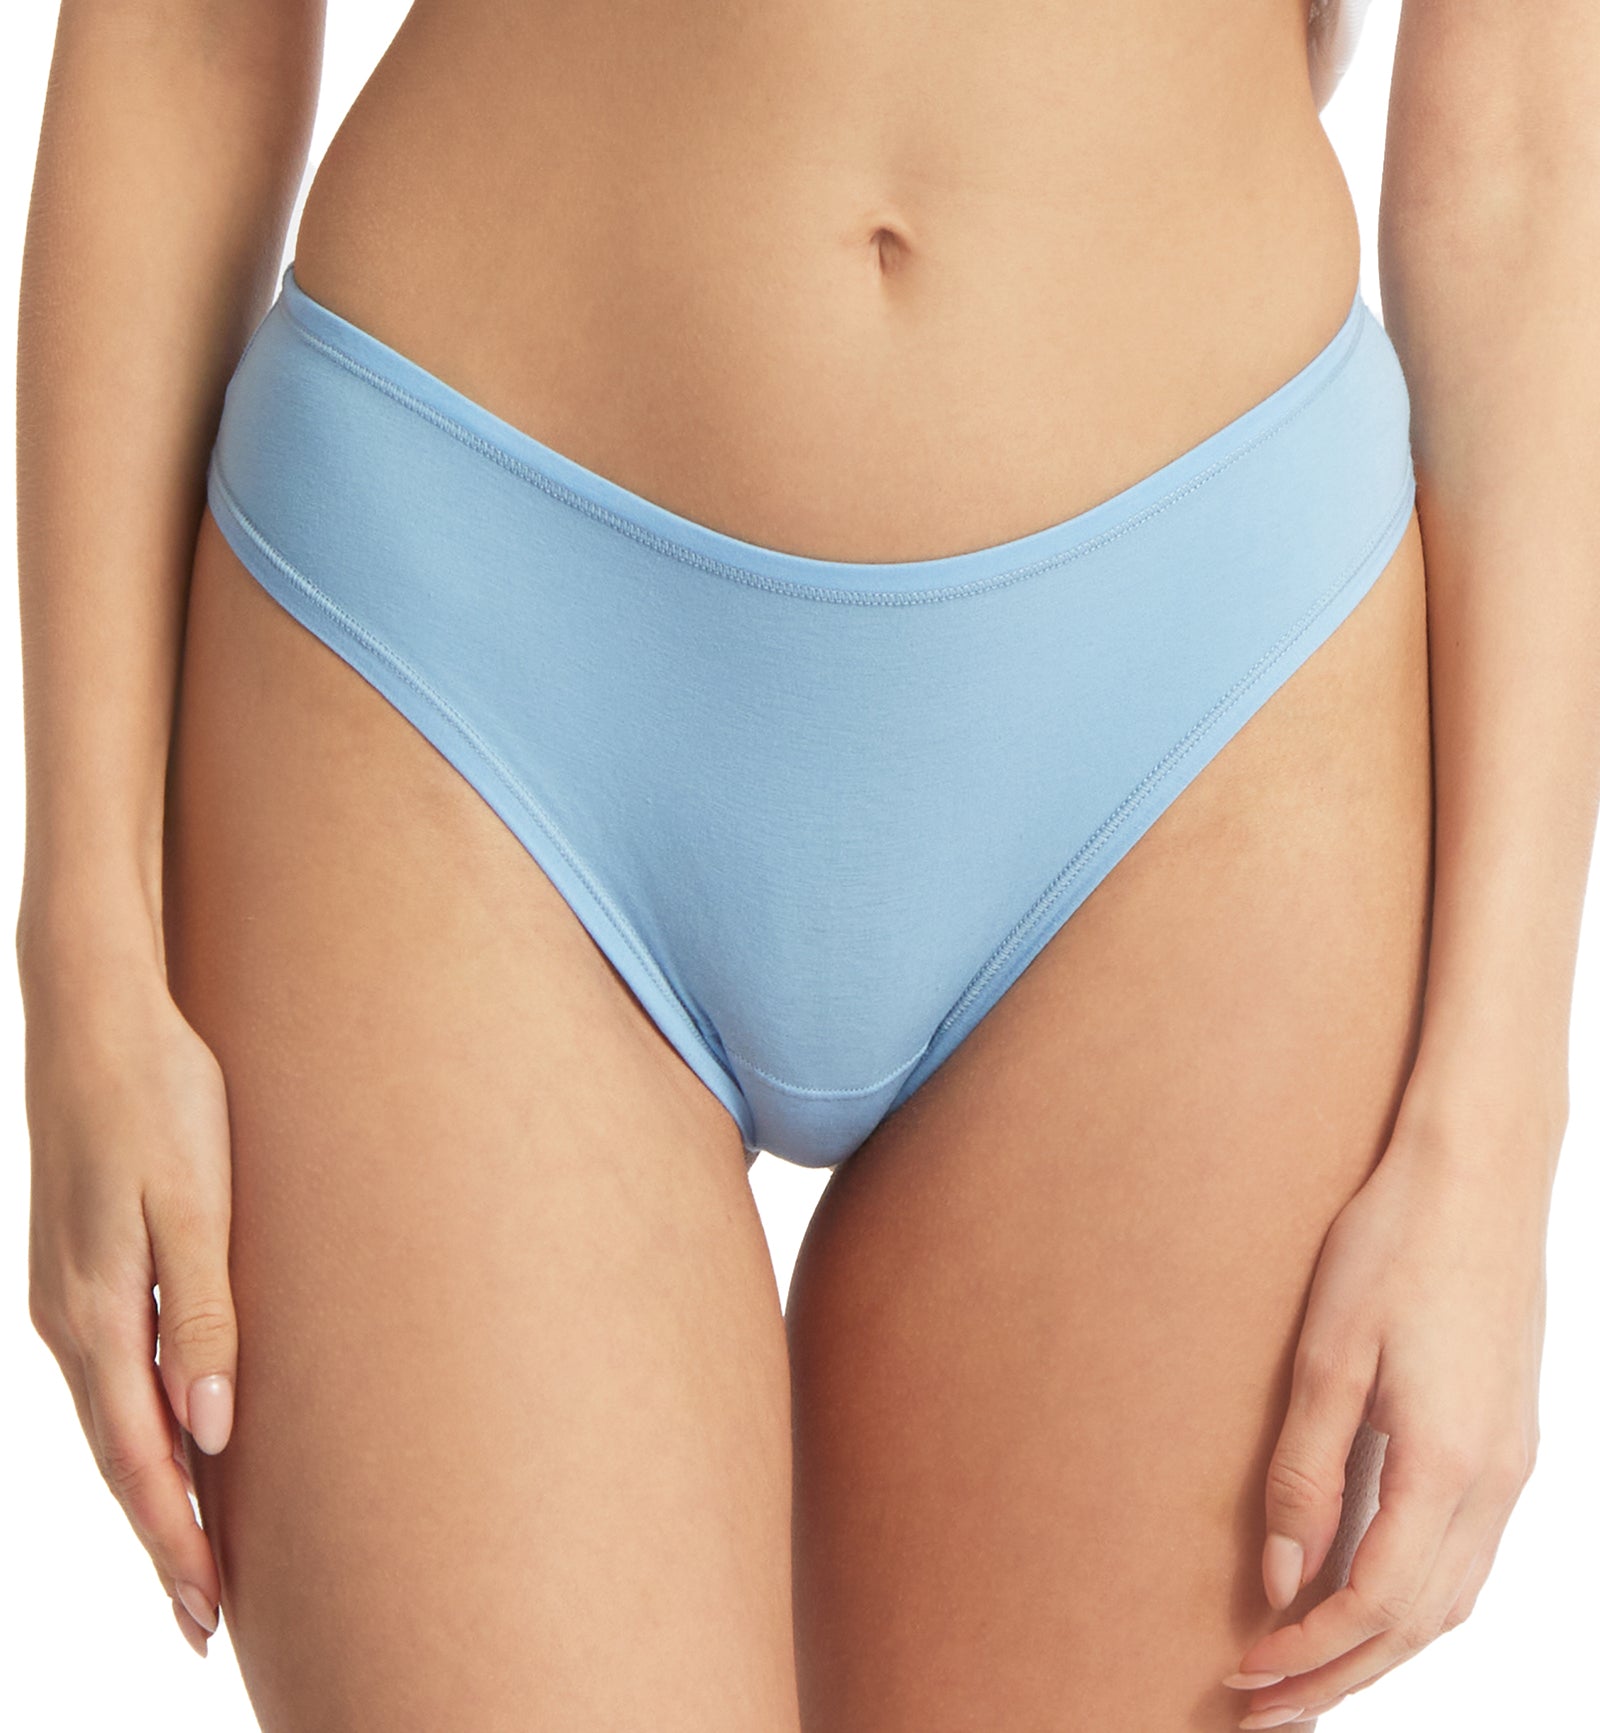 Hanky Panky Play Cotton Natural Rise Thong (721664),XS/S,Partly Cloudy - Partly Cloudy,XS/S